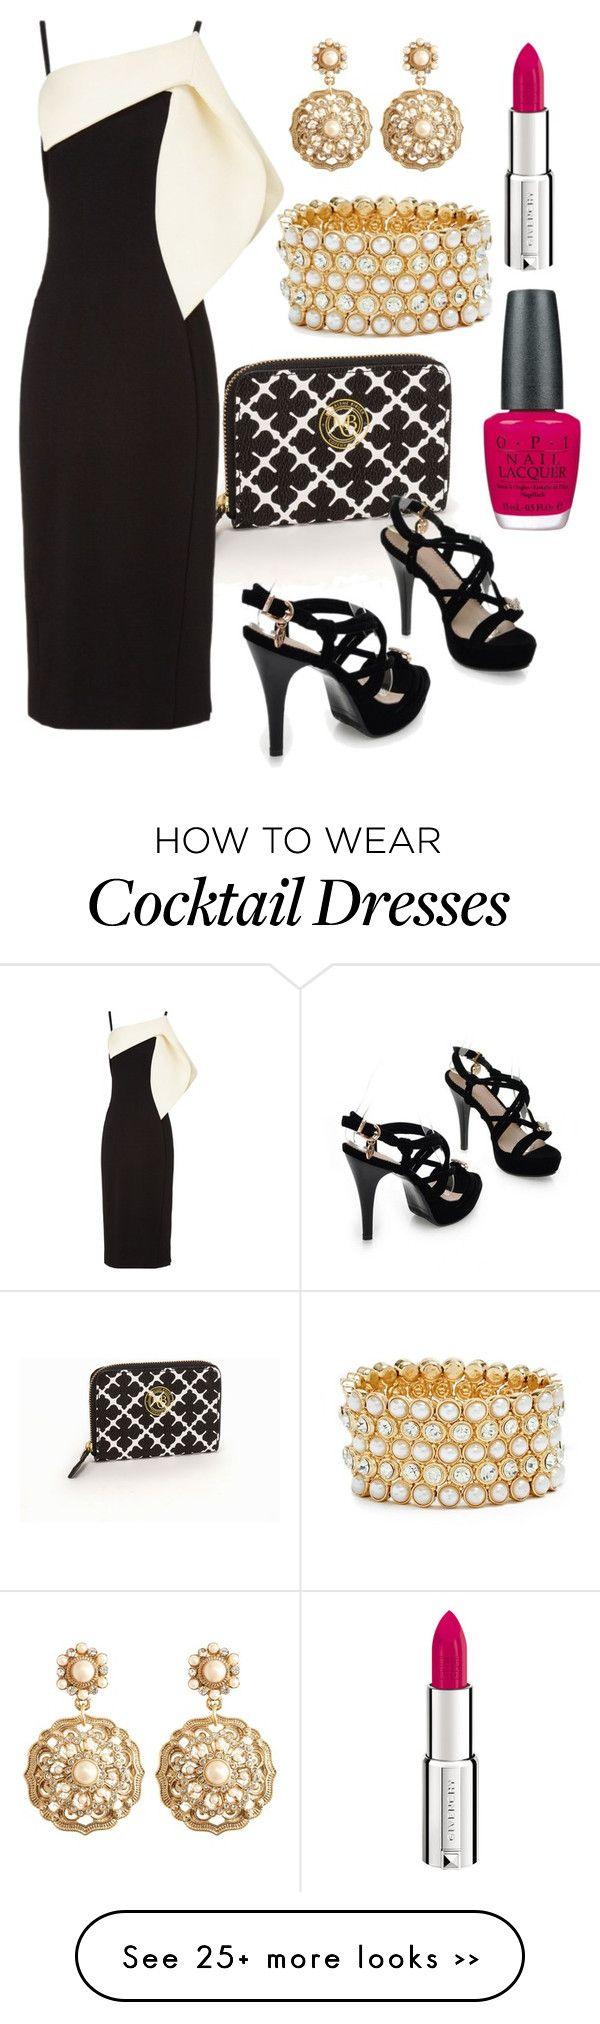 Wedding - Cocktail Dress Outfits